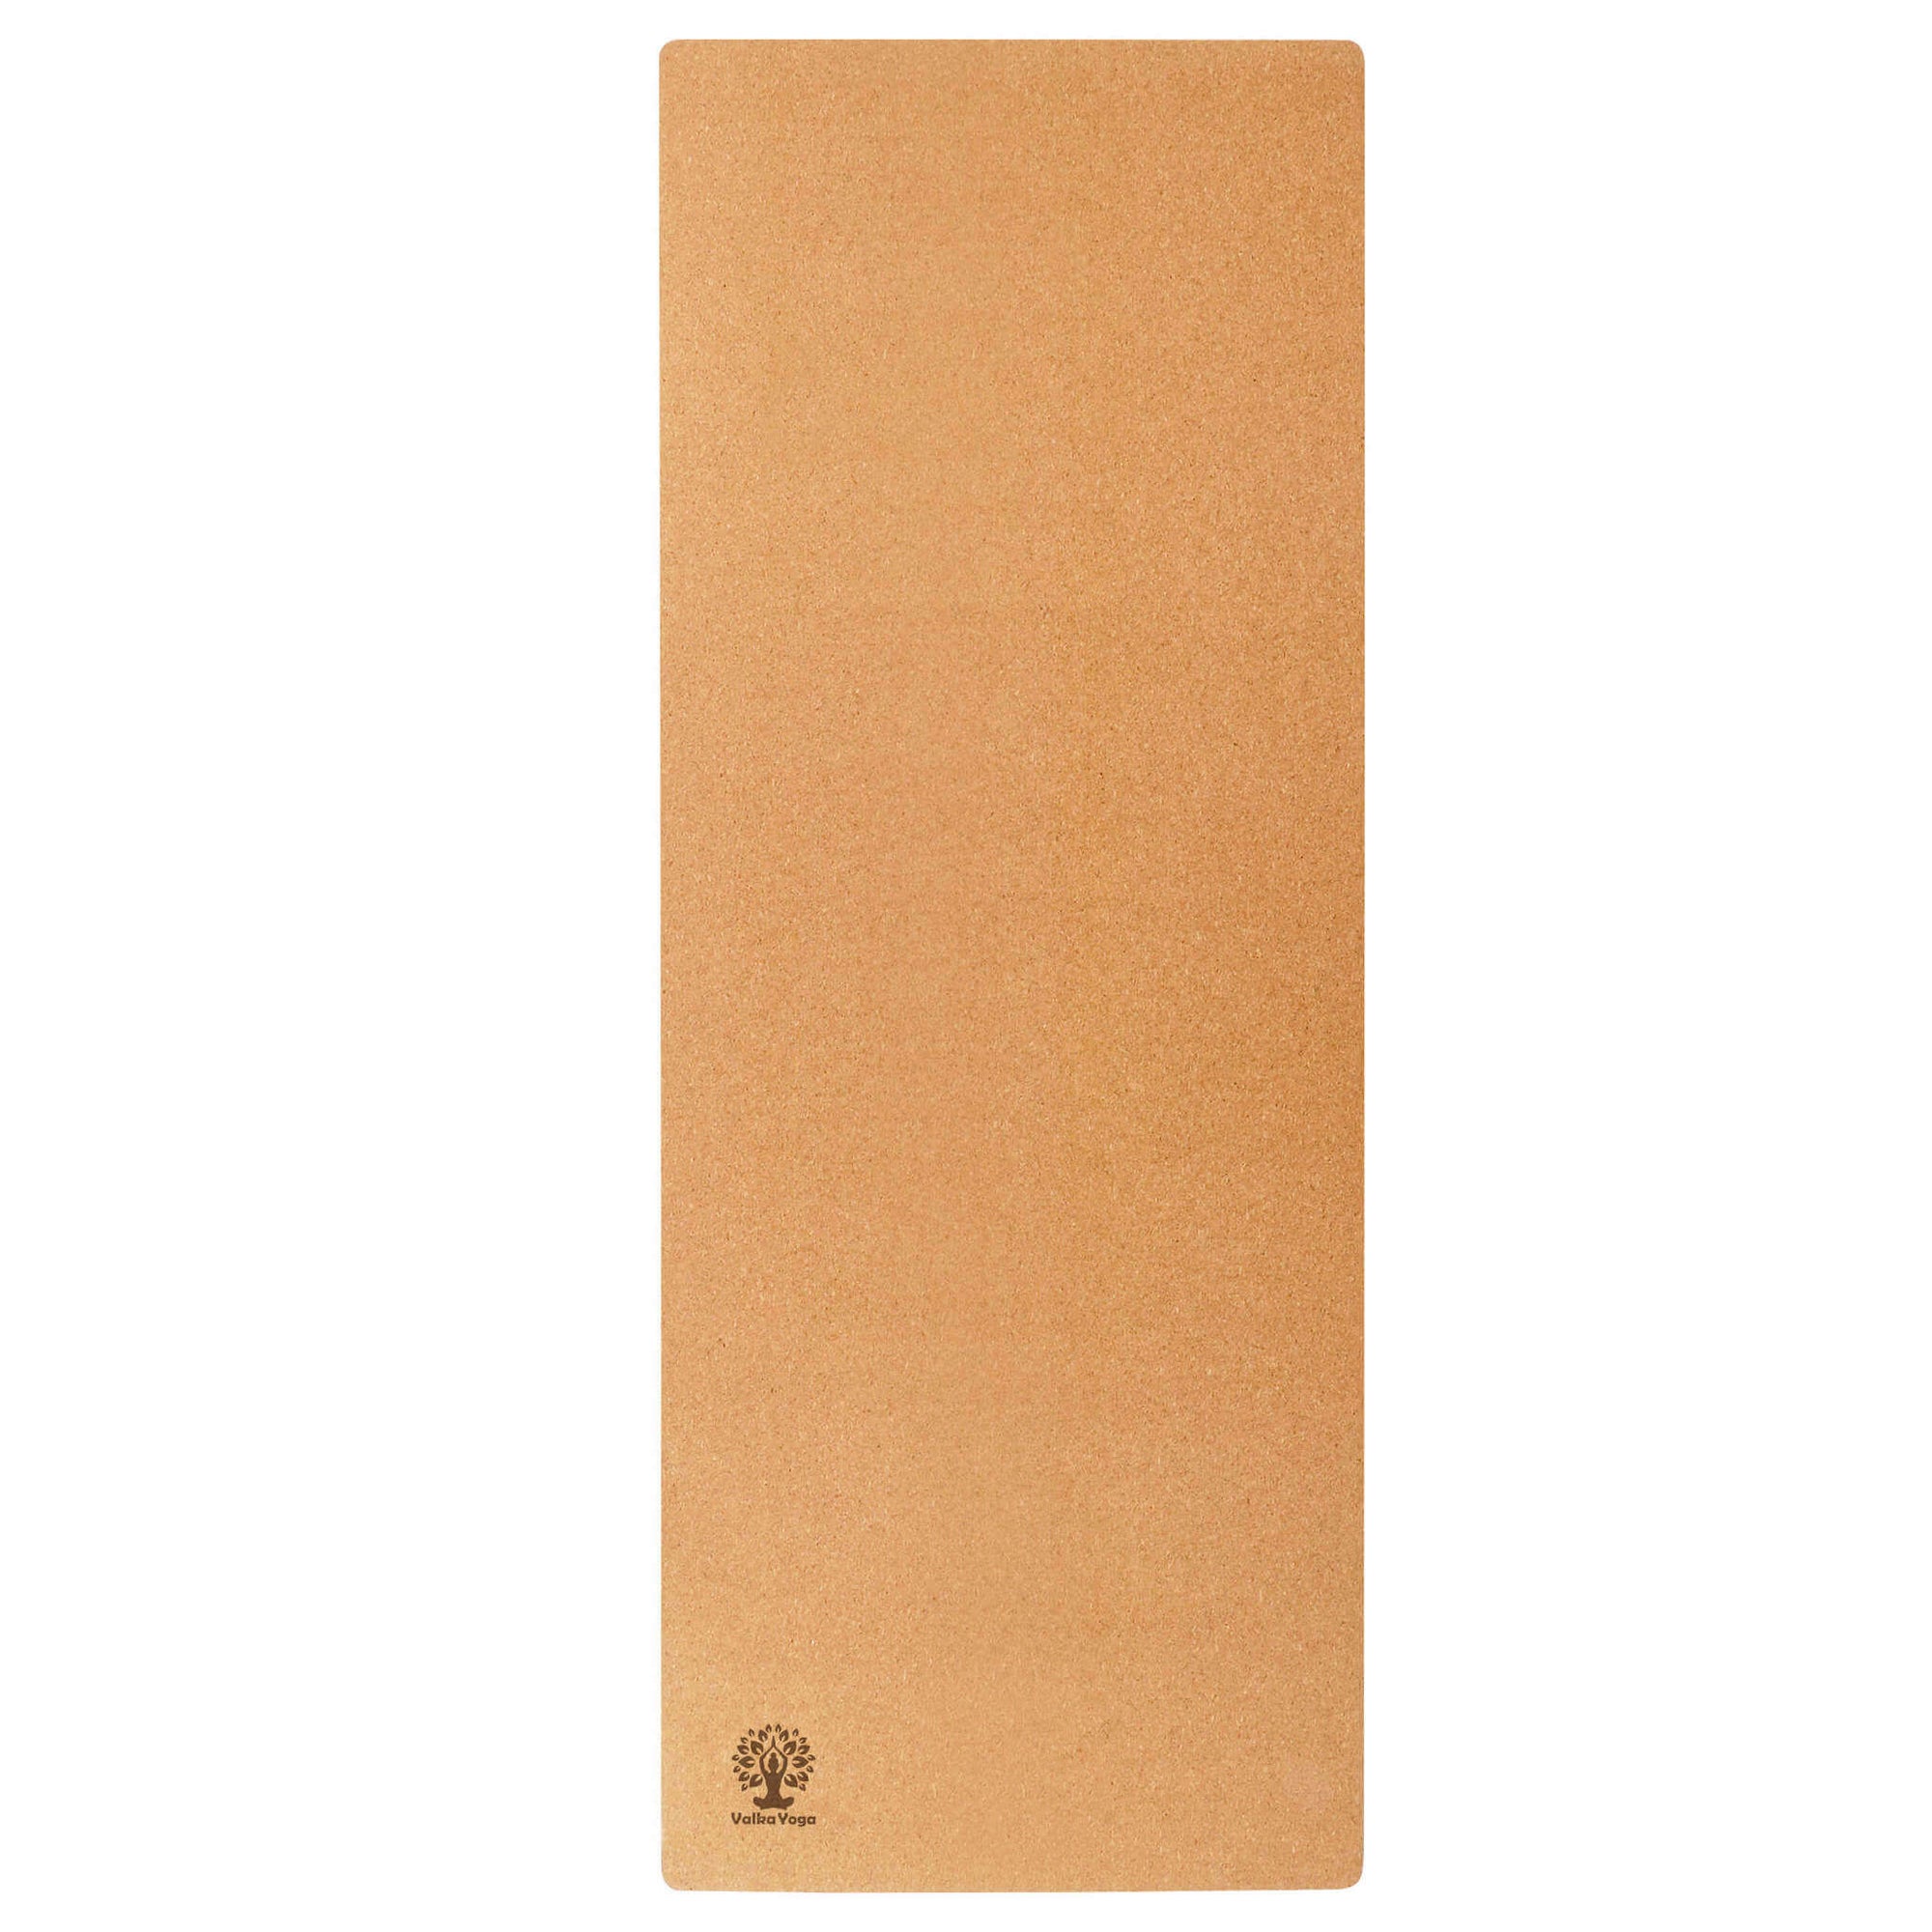 Extra wide and thick yoga mat